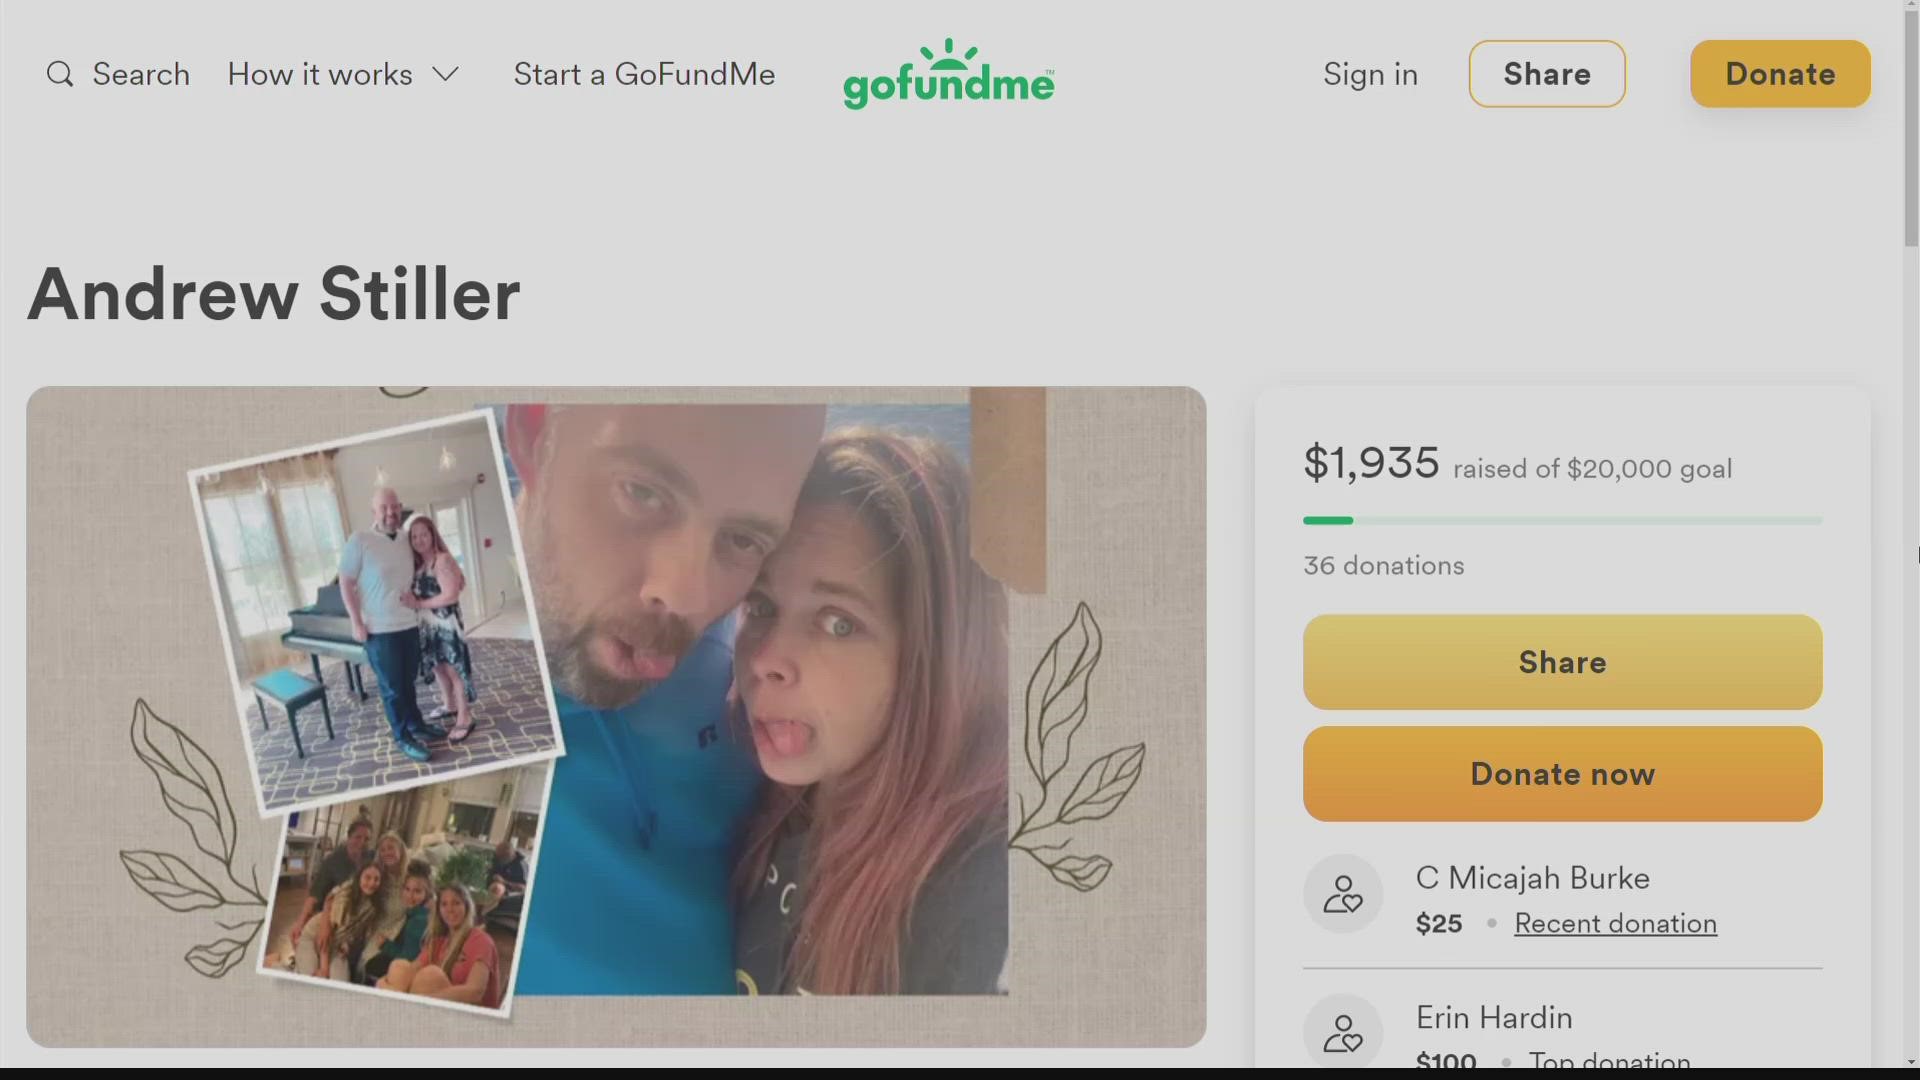 Melissa Stiller has set up a GoFundMe to pay for funeral expenses for her late husband Andrew Stiller.